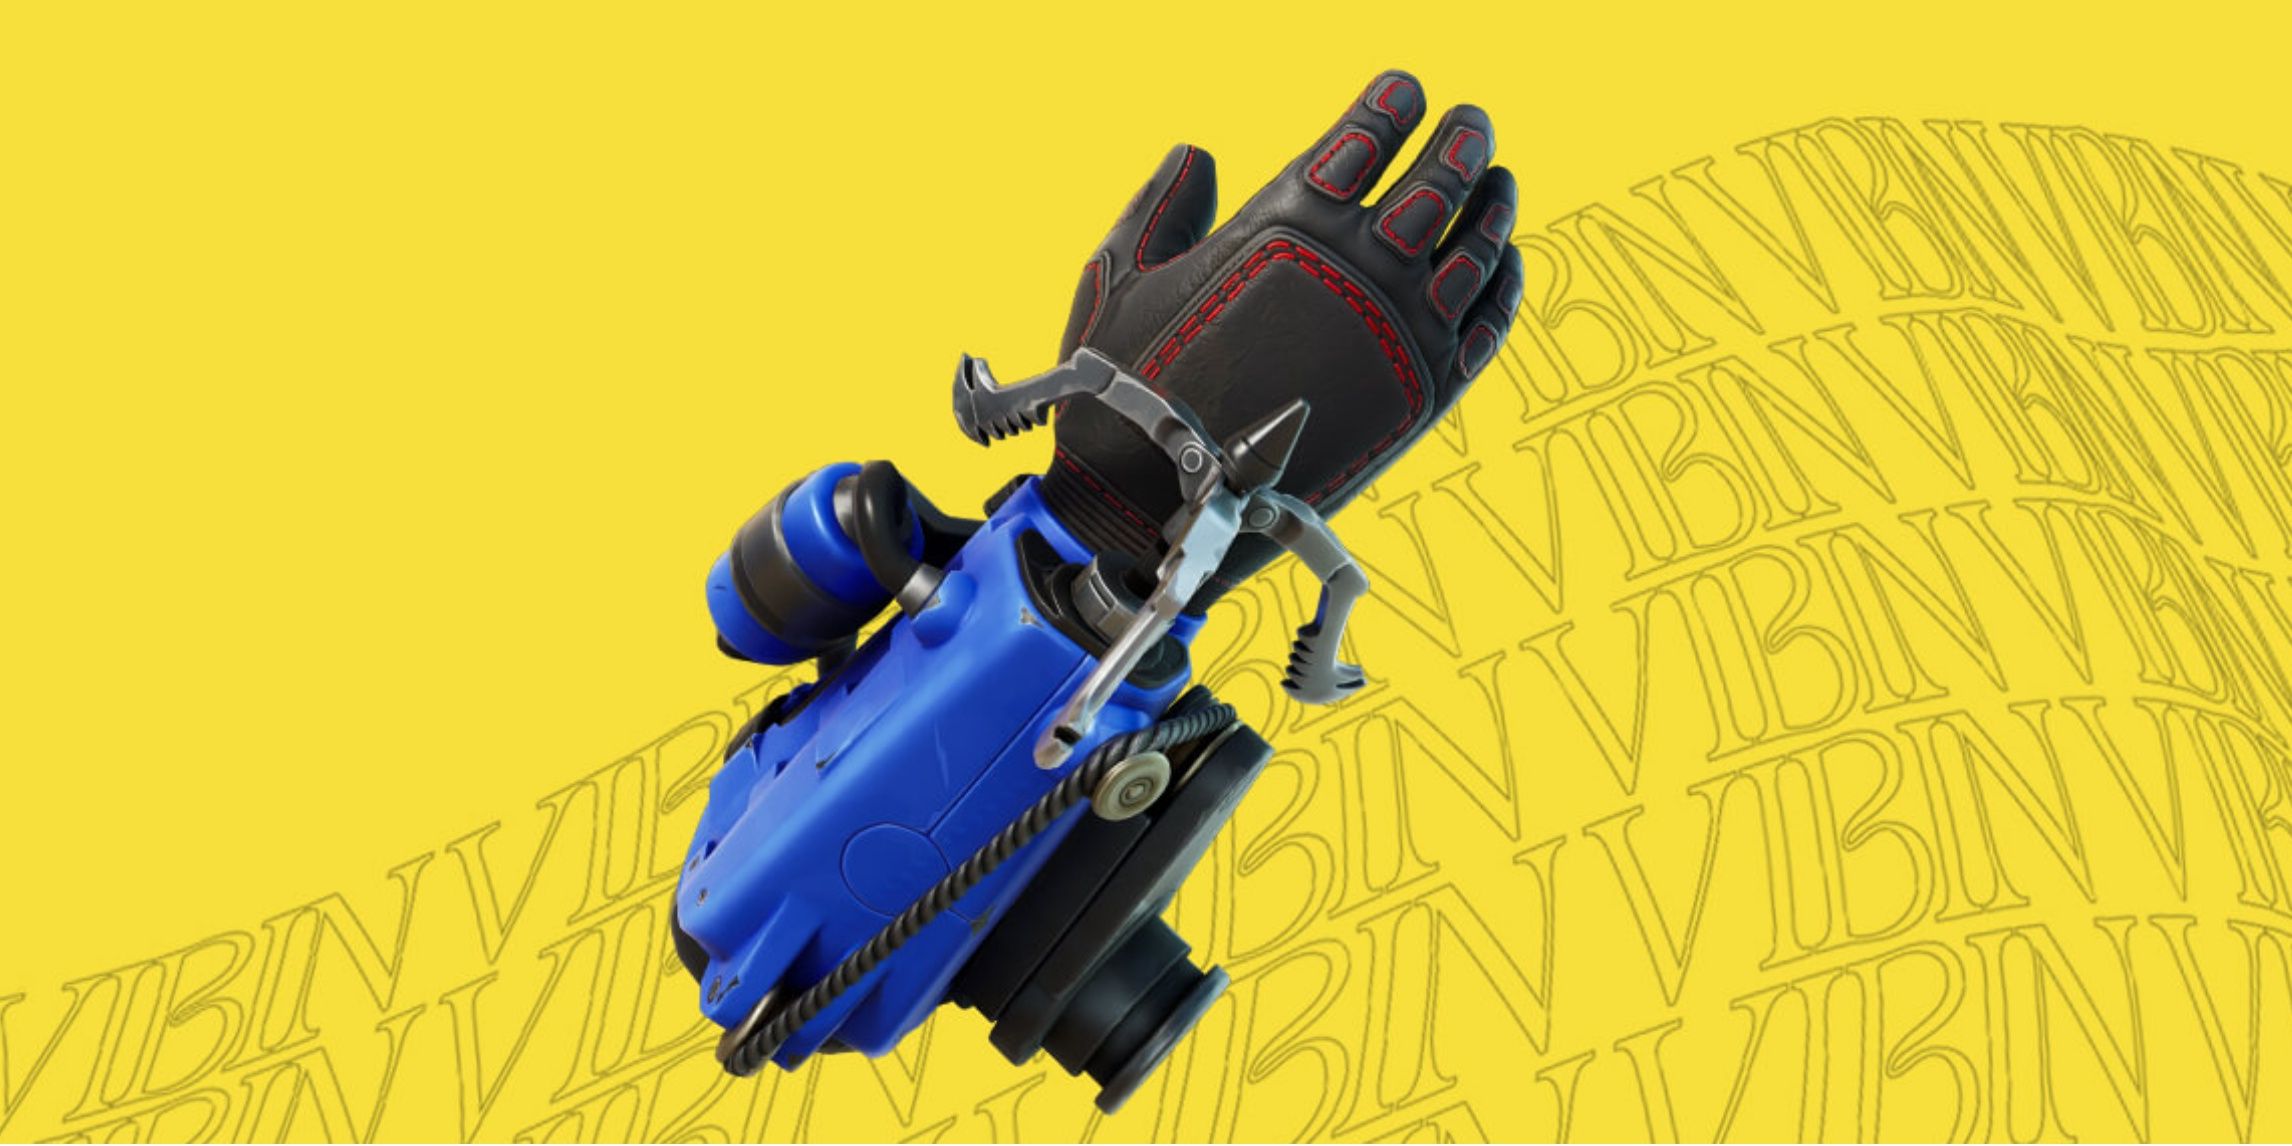 The fortnite grappling glove added in chapter 3 season 3